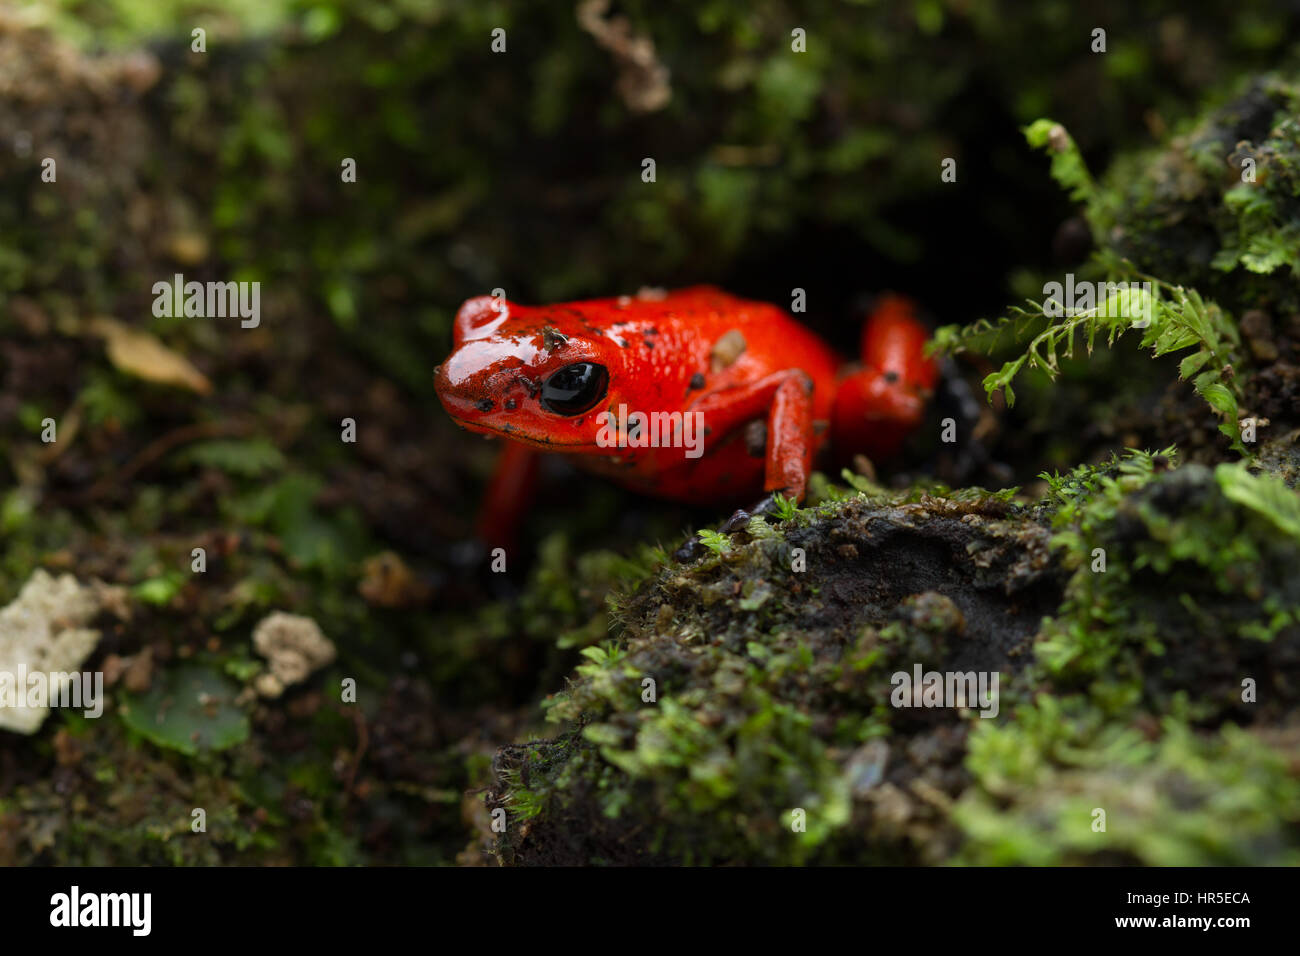 Strawberry or Blue Jeans Poison Dart Frog, Oophagia pumilio, formerly Dendrobates pumilio, is a tiny poison frog in the rainforests of Costa Rica.  It Stock Photo